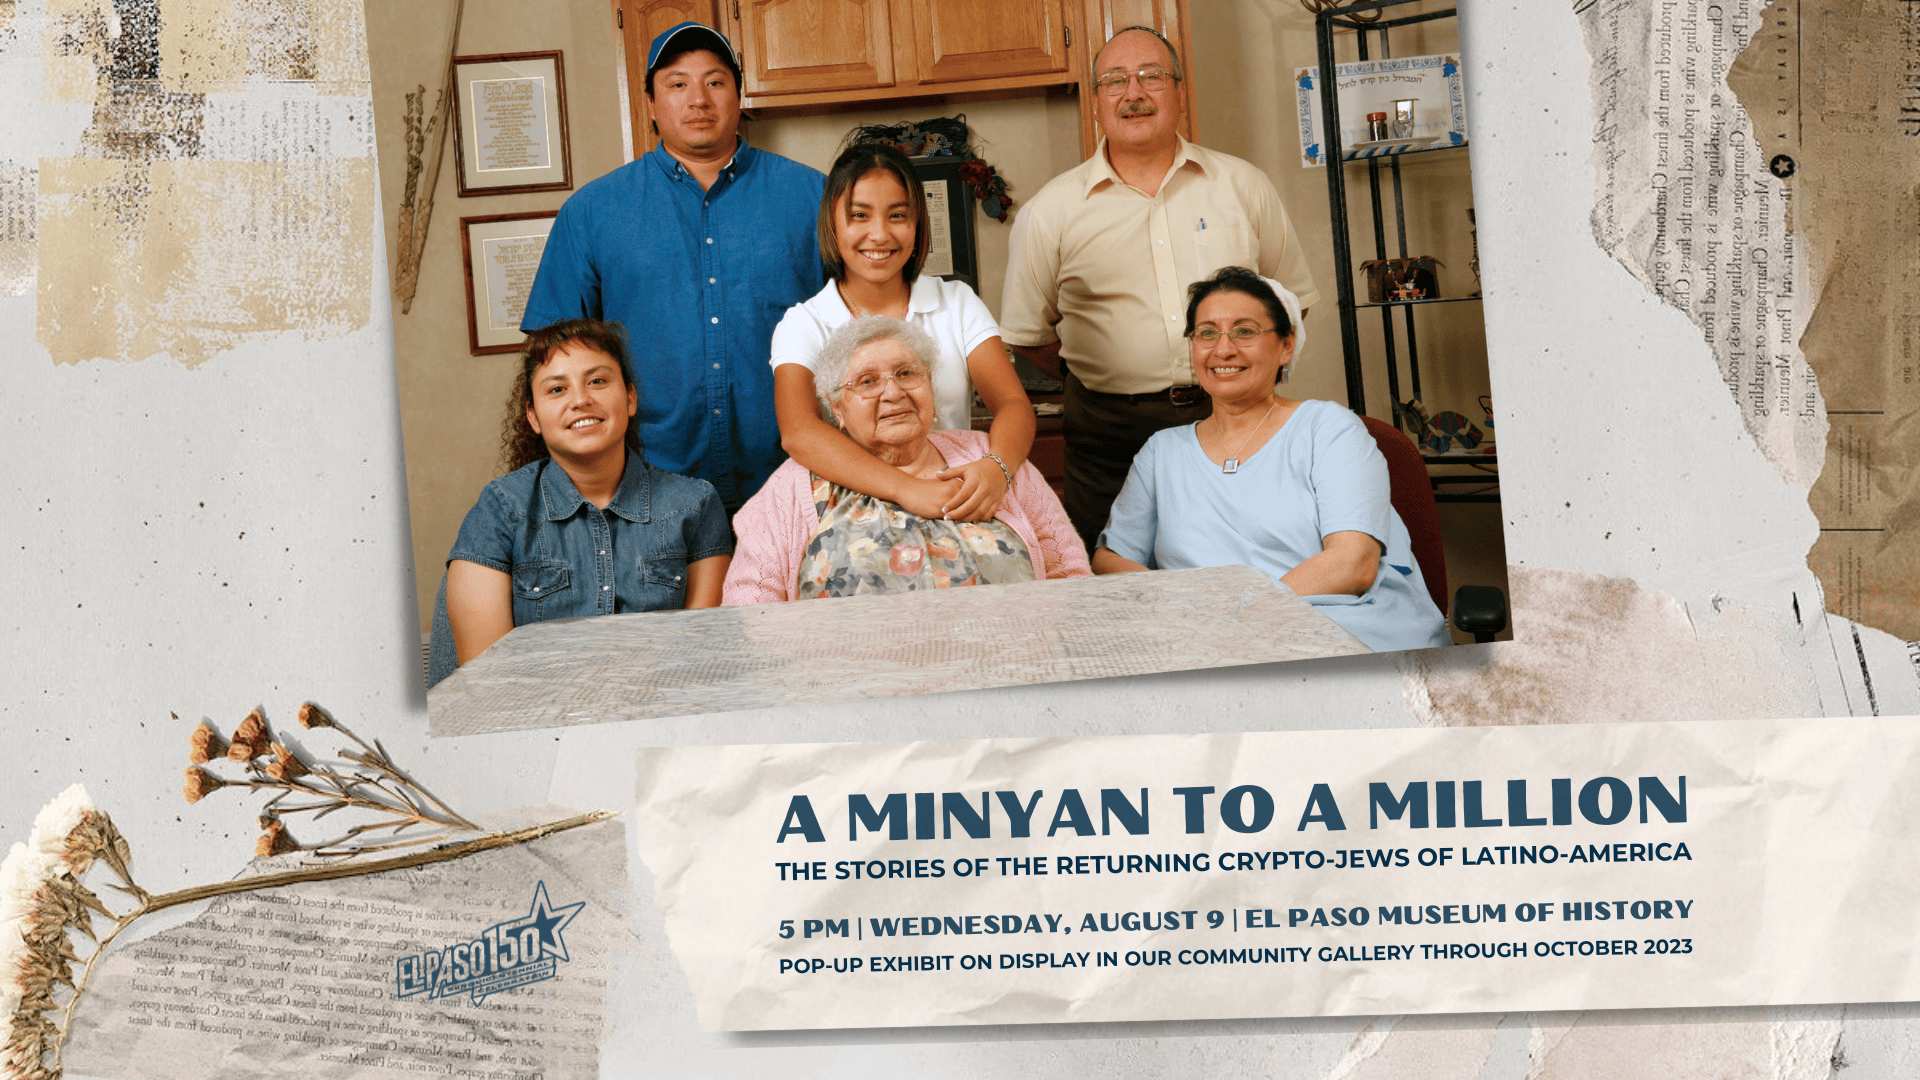 A Minyan to a Million: The Stories of the Returning Crypto-Jews of Latino-America